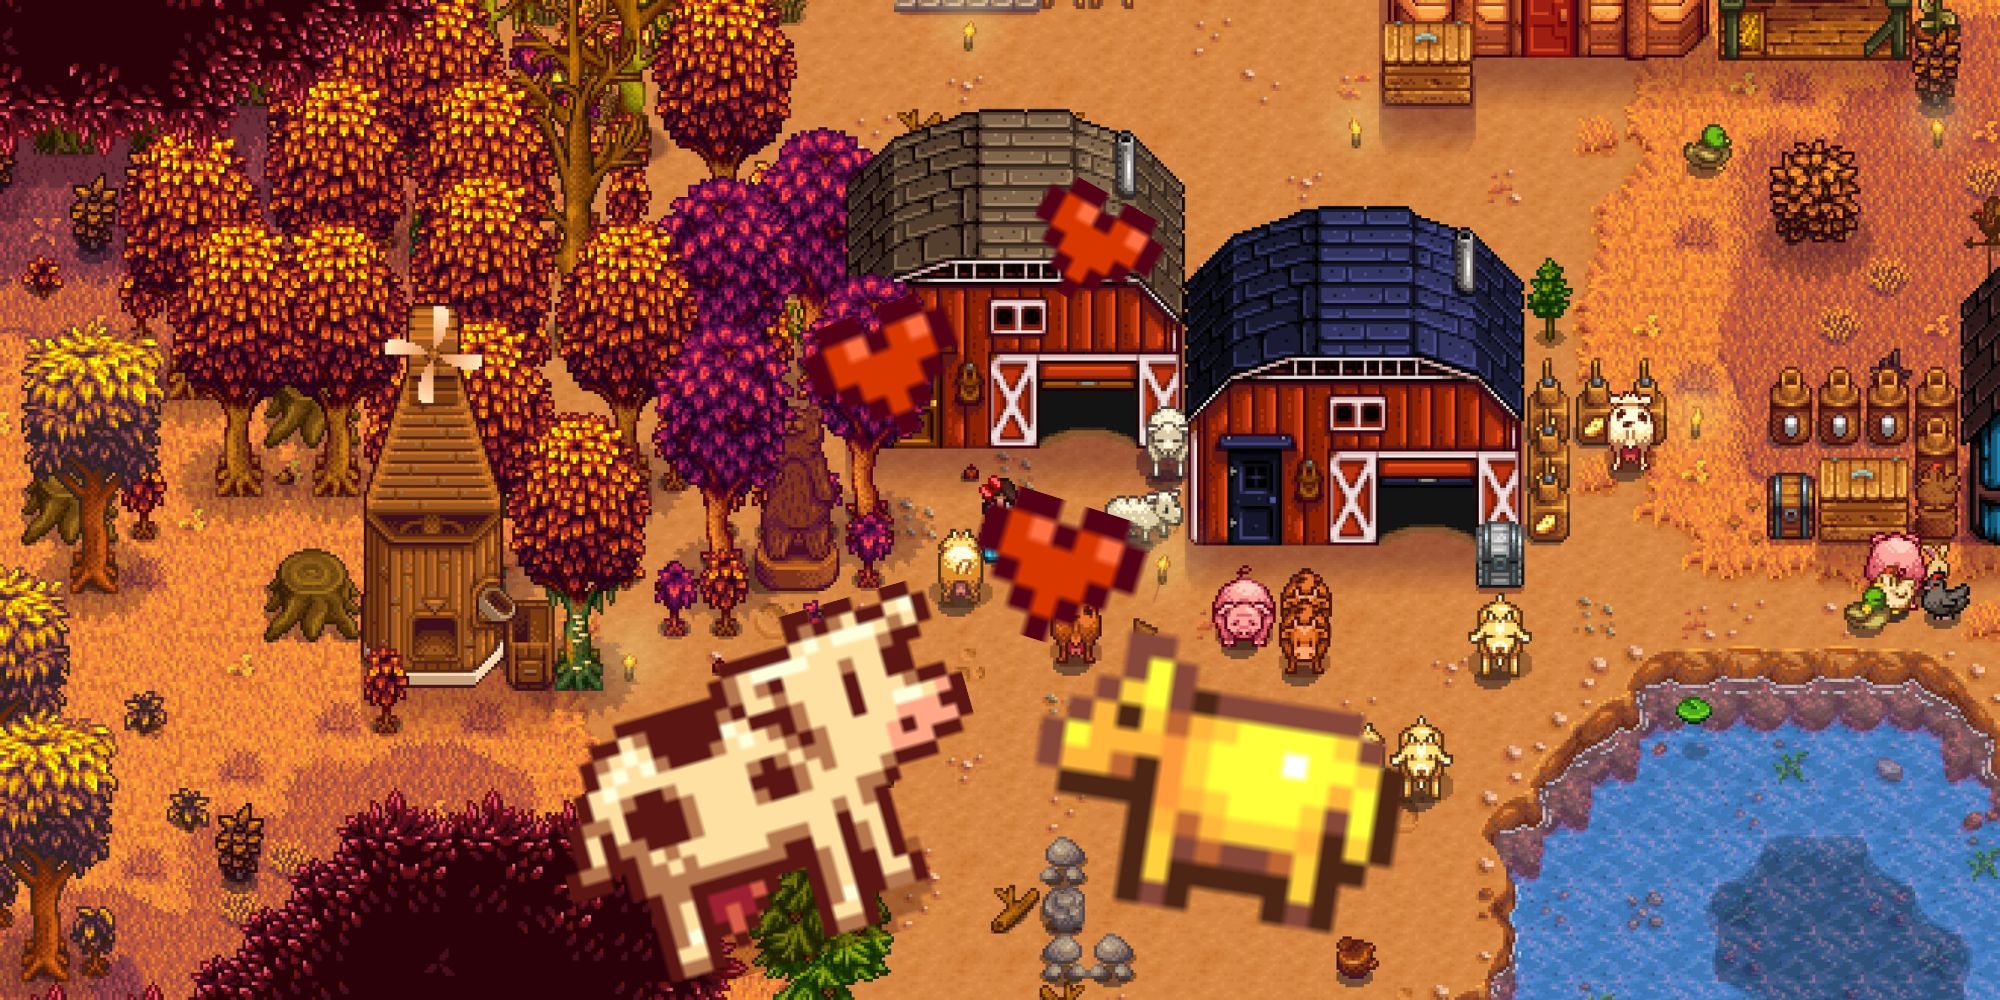 Stardew Valley: A cow and Golden Animal Cracker over an image of the player's farm. Hearts float up from the cow and cracker